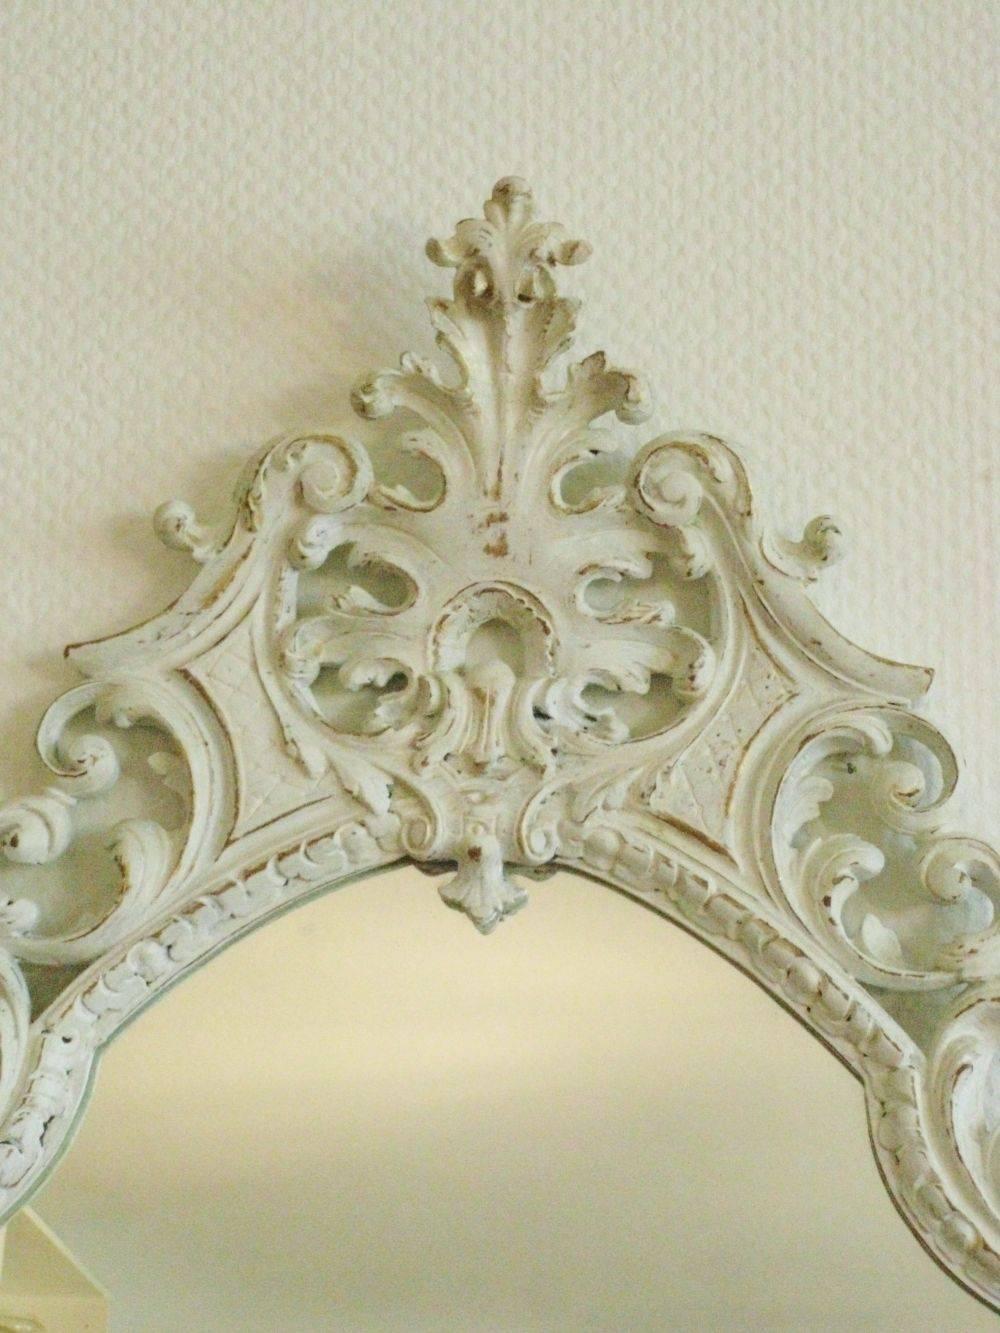 19th Century Antique Italian Rococo Style Hand-Carved Wood Gilded and White Arched Top Mirror For Sale